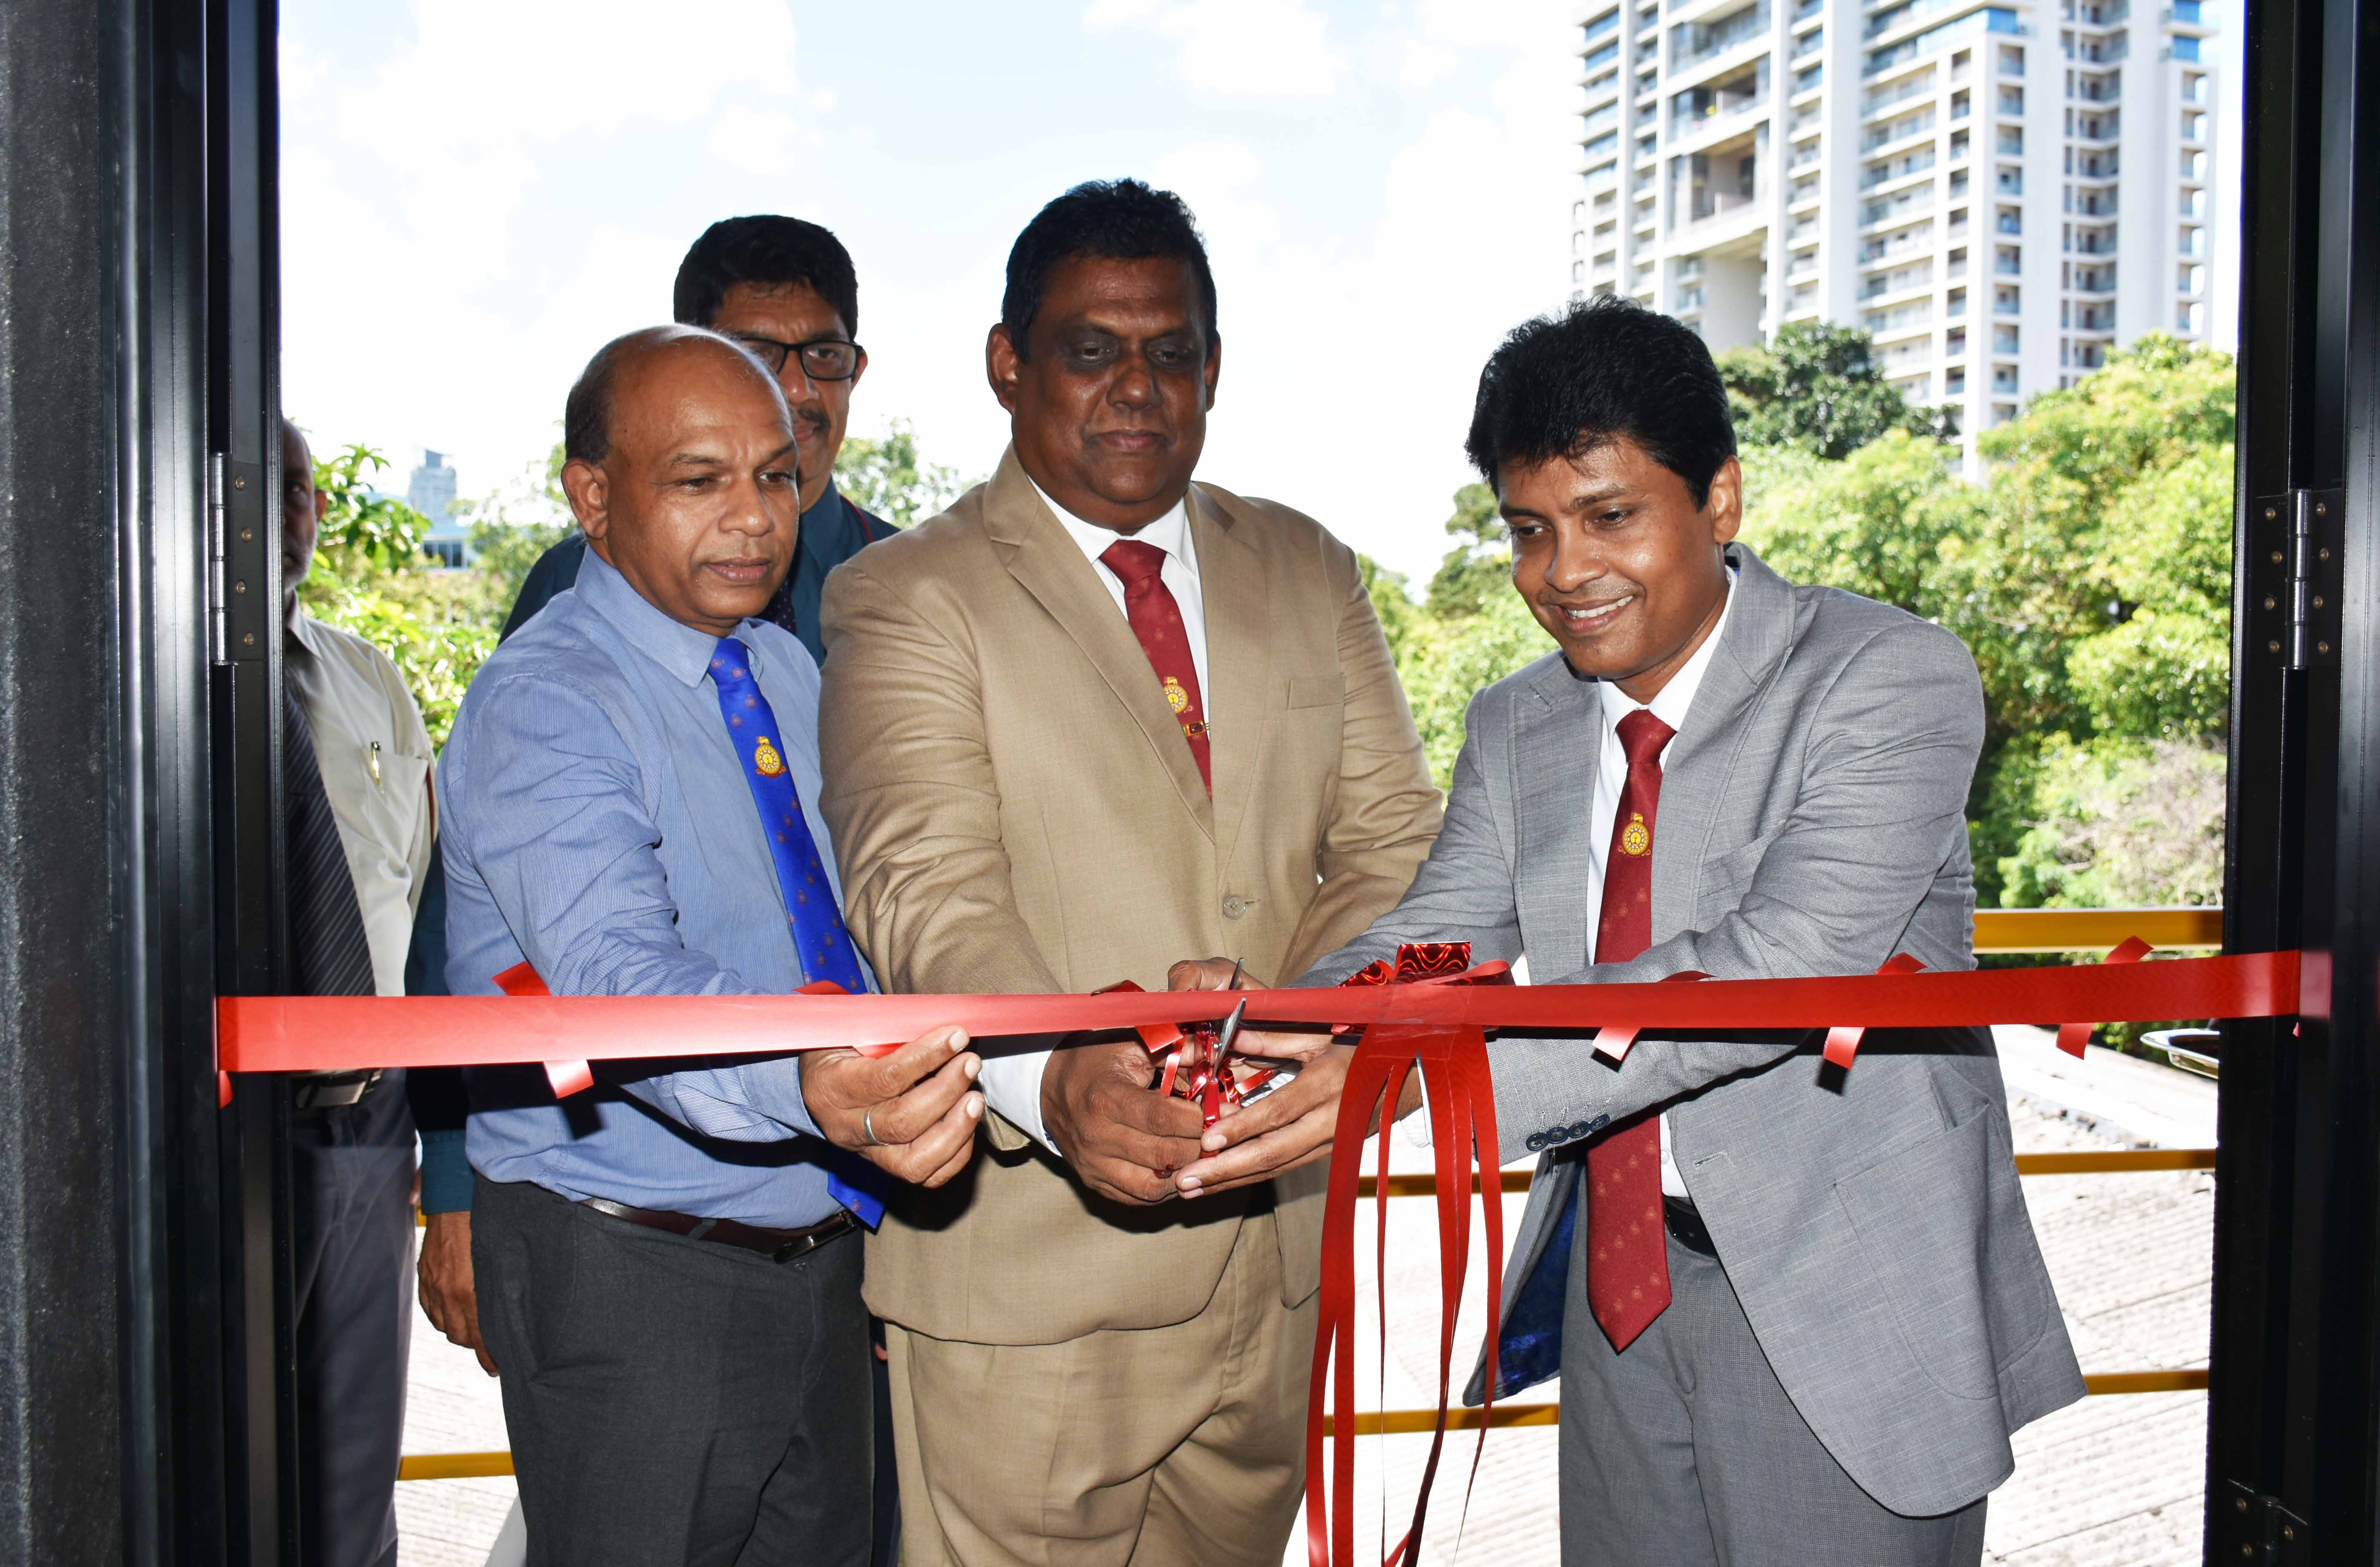 Inauguration Ceremony of the New Lecture Theatre (New building – Stage I) of the Faculty of Indigenous Medicine, University of Colombo